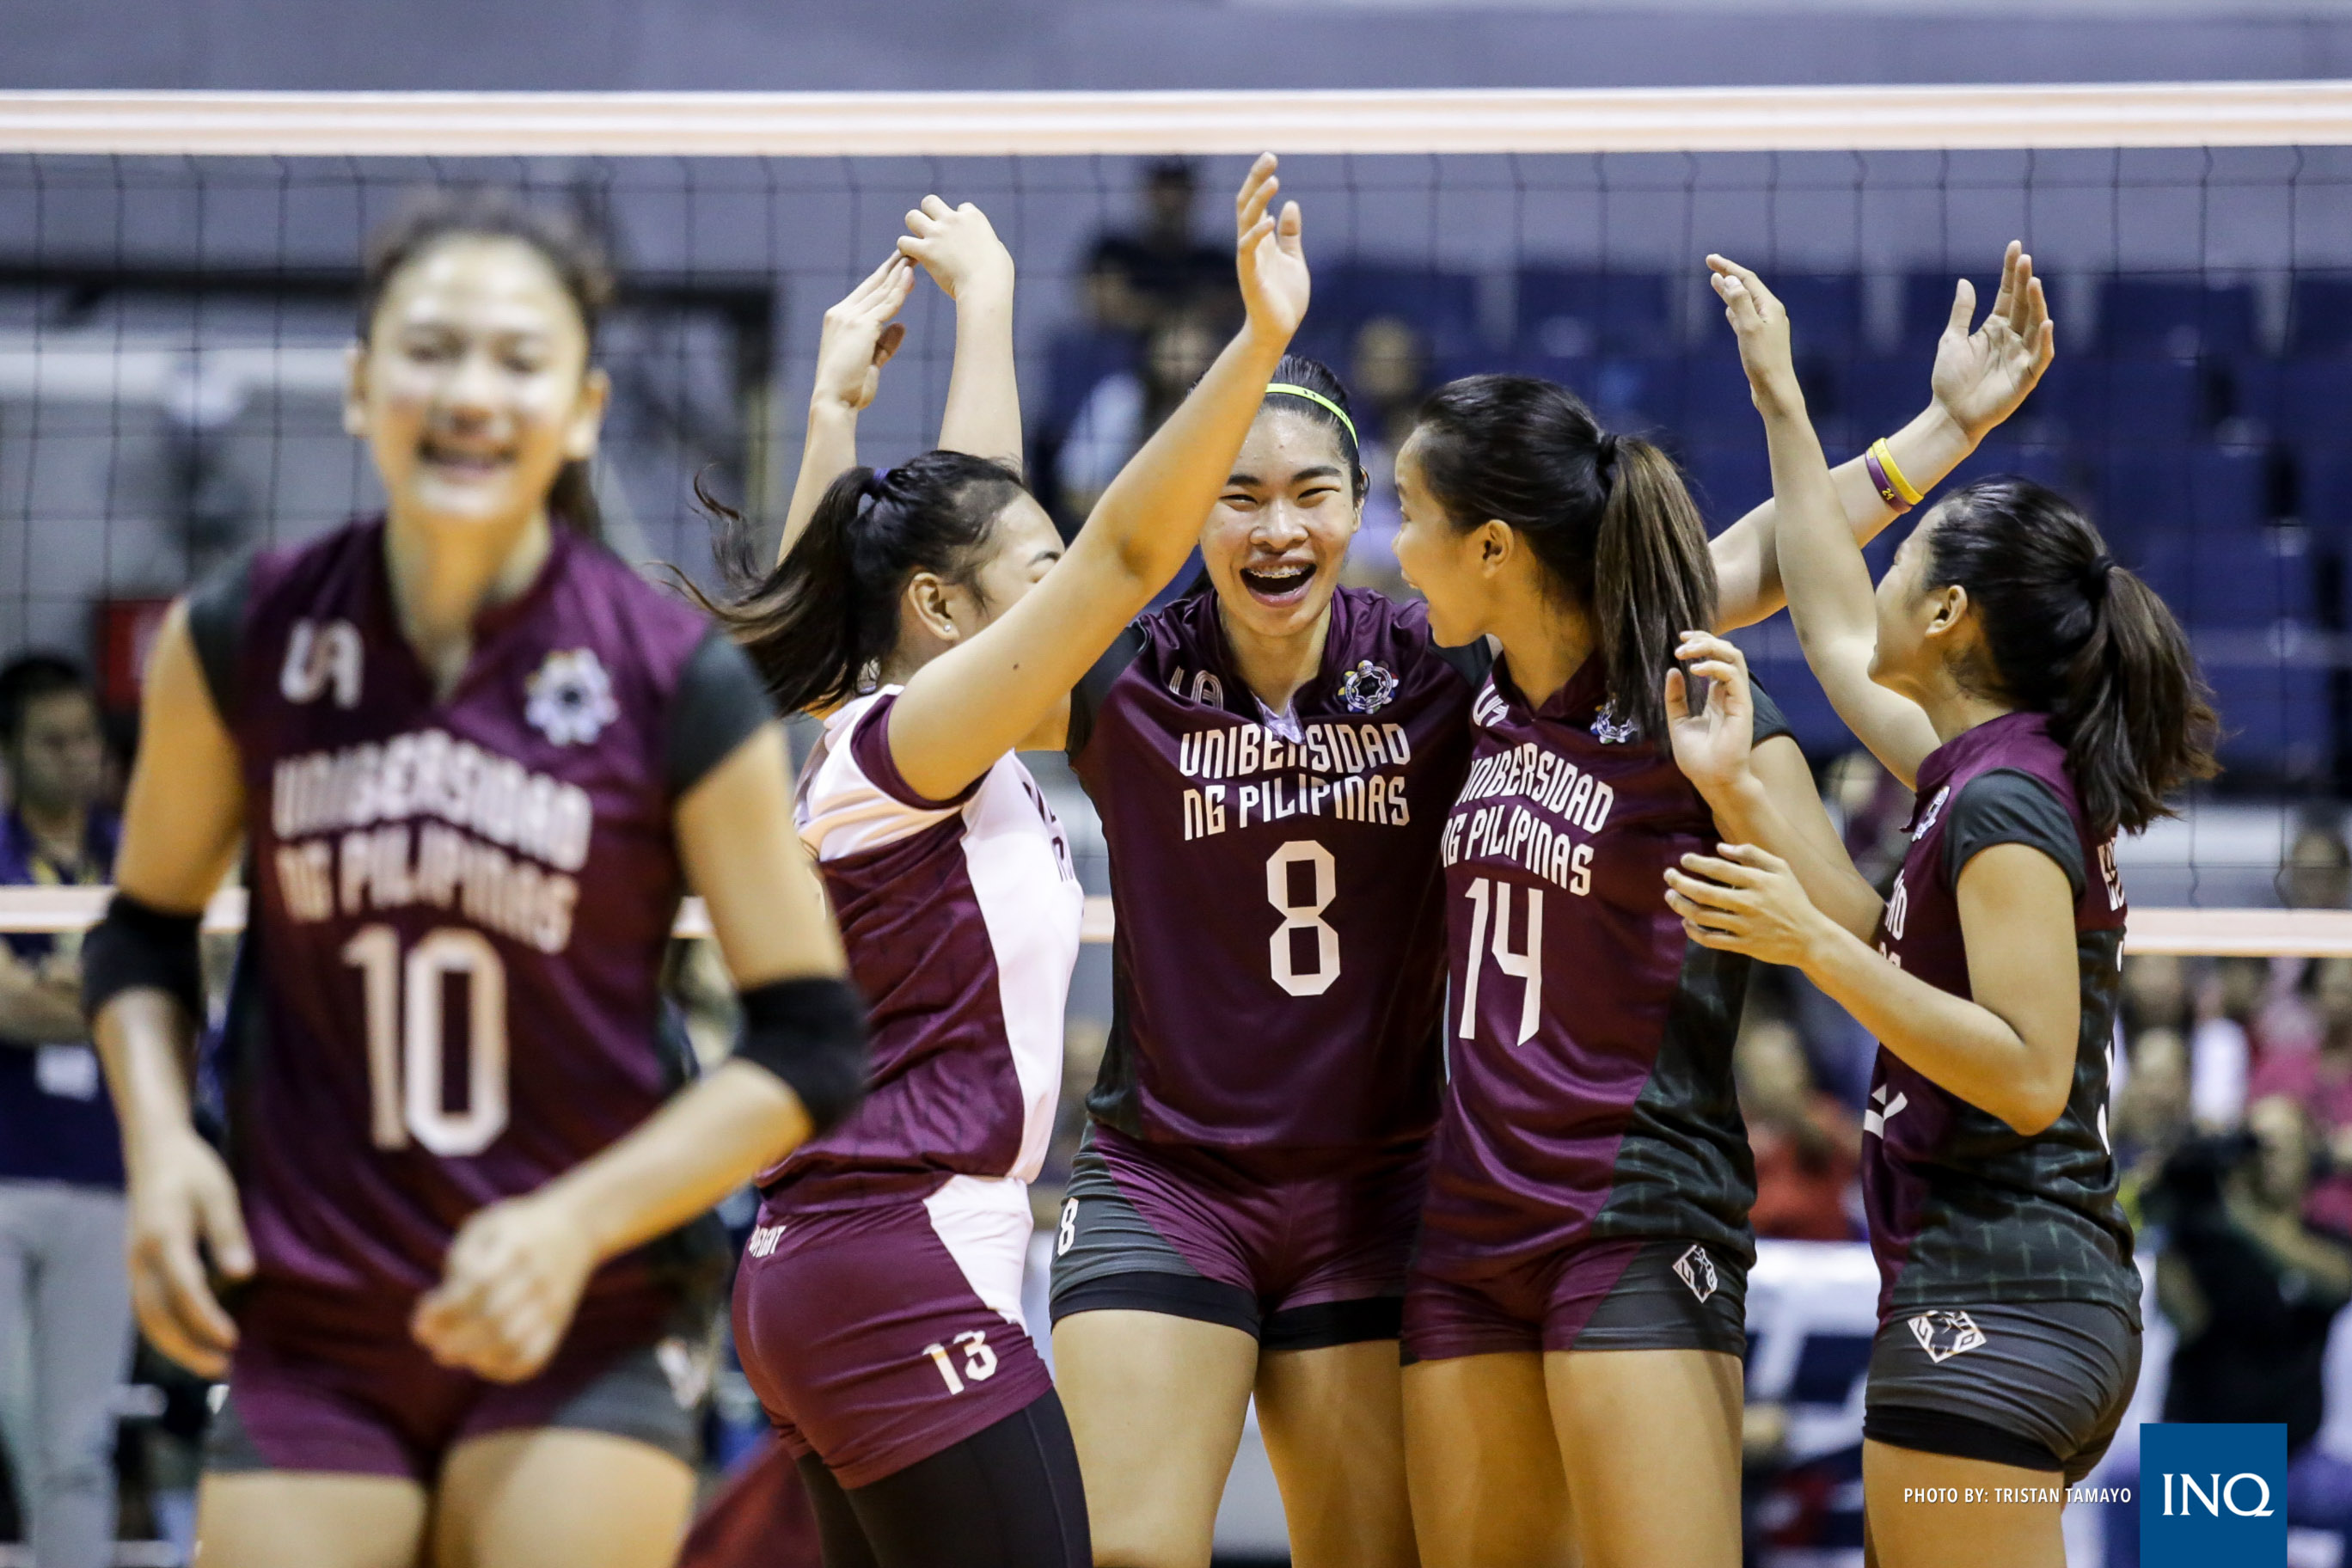 UP's Kathy Bersola. Photo by Tristan Tamayo/INQUIRER.net